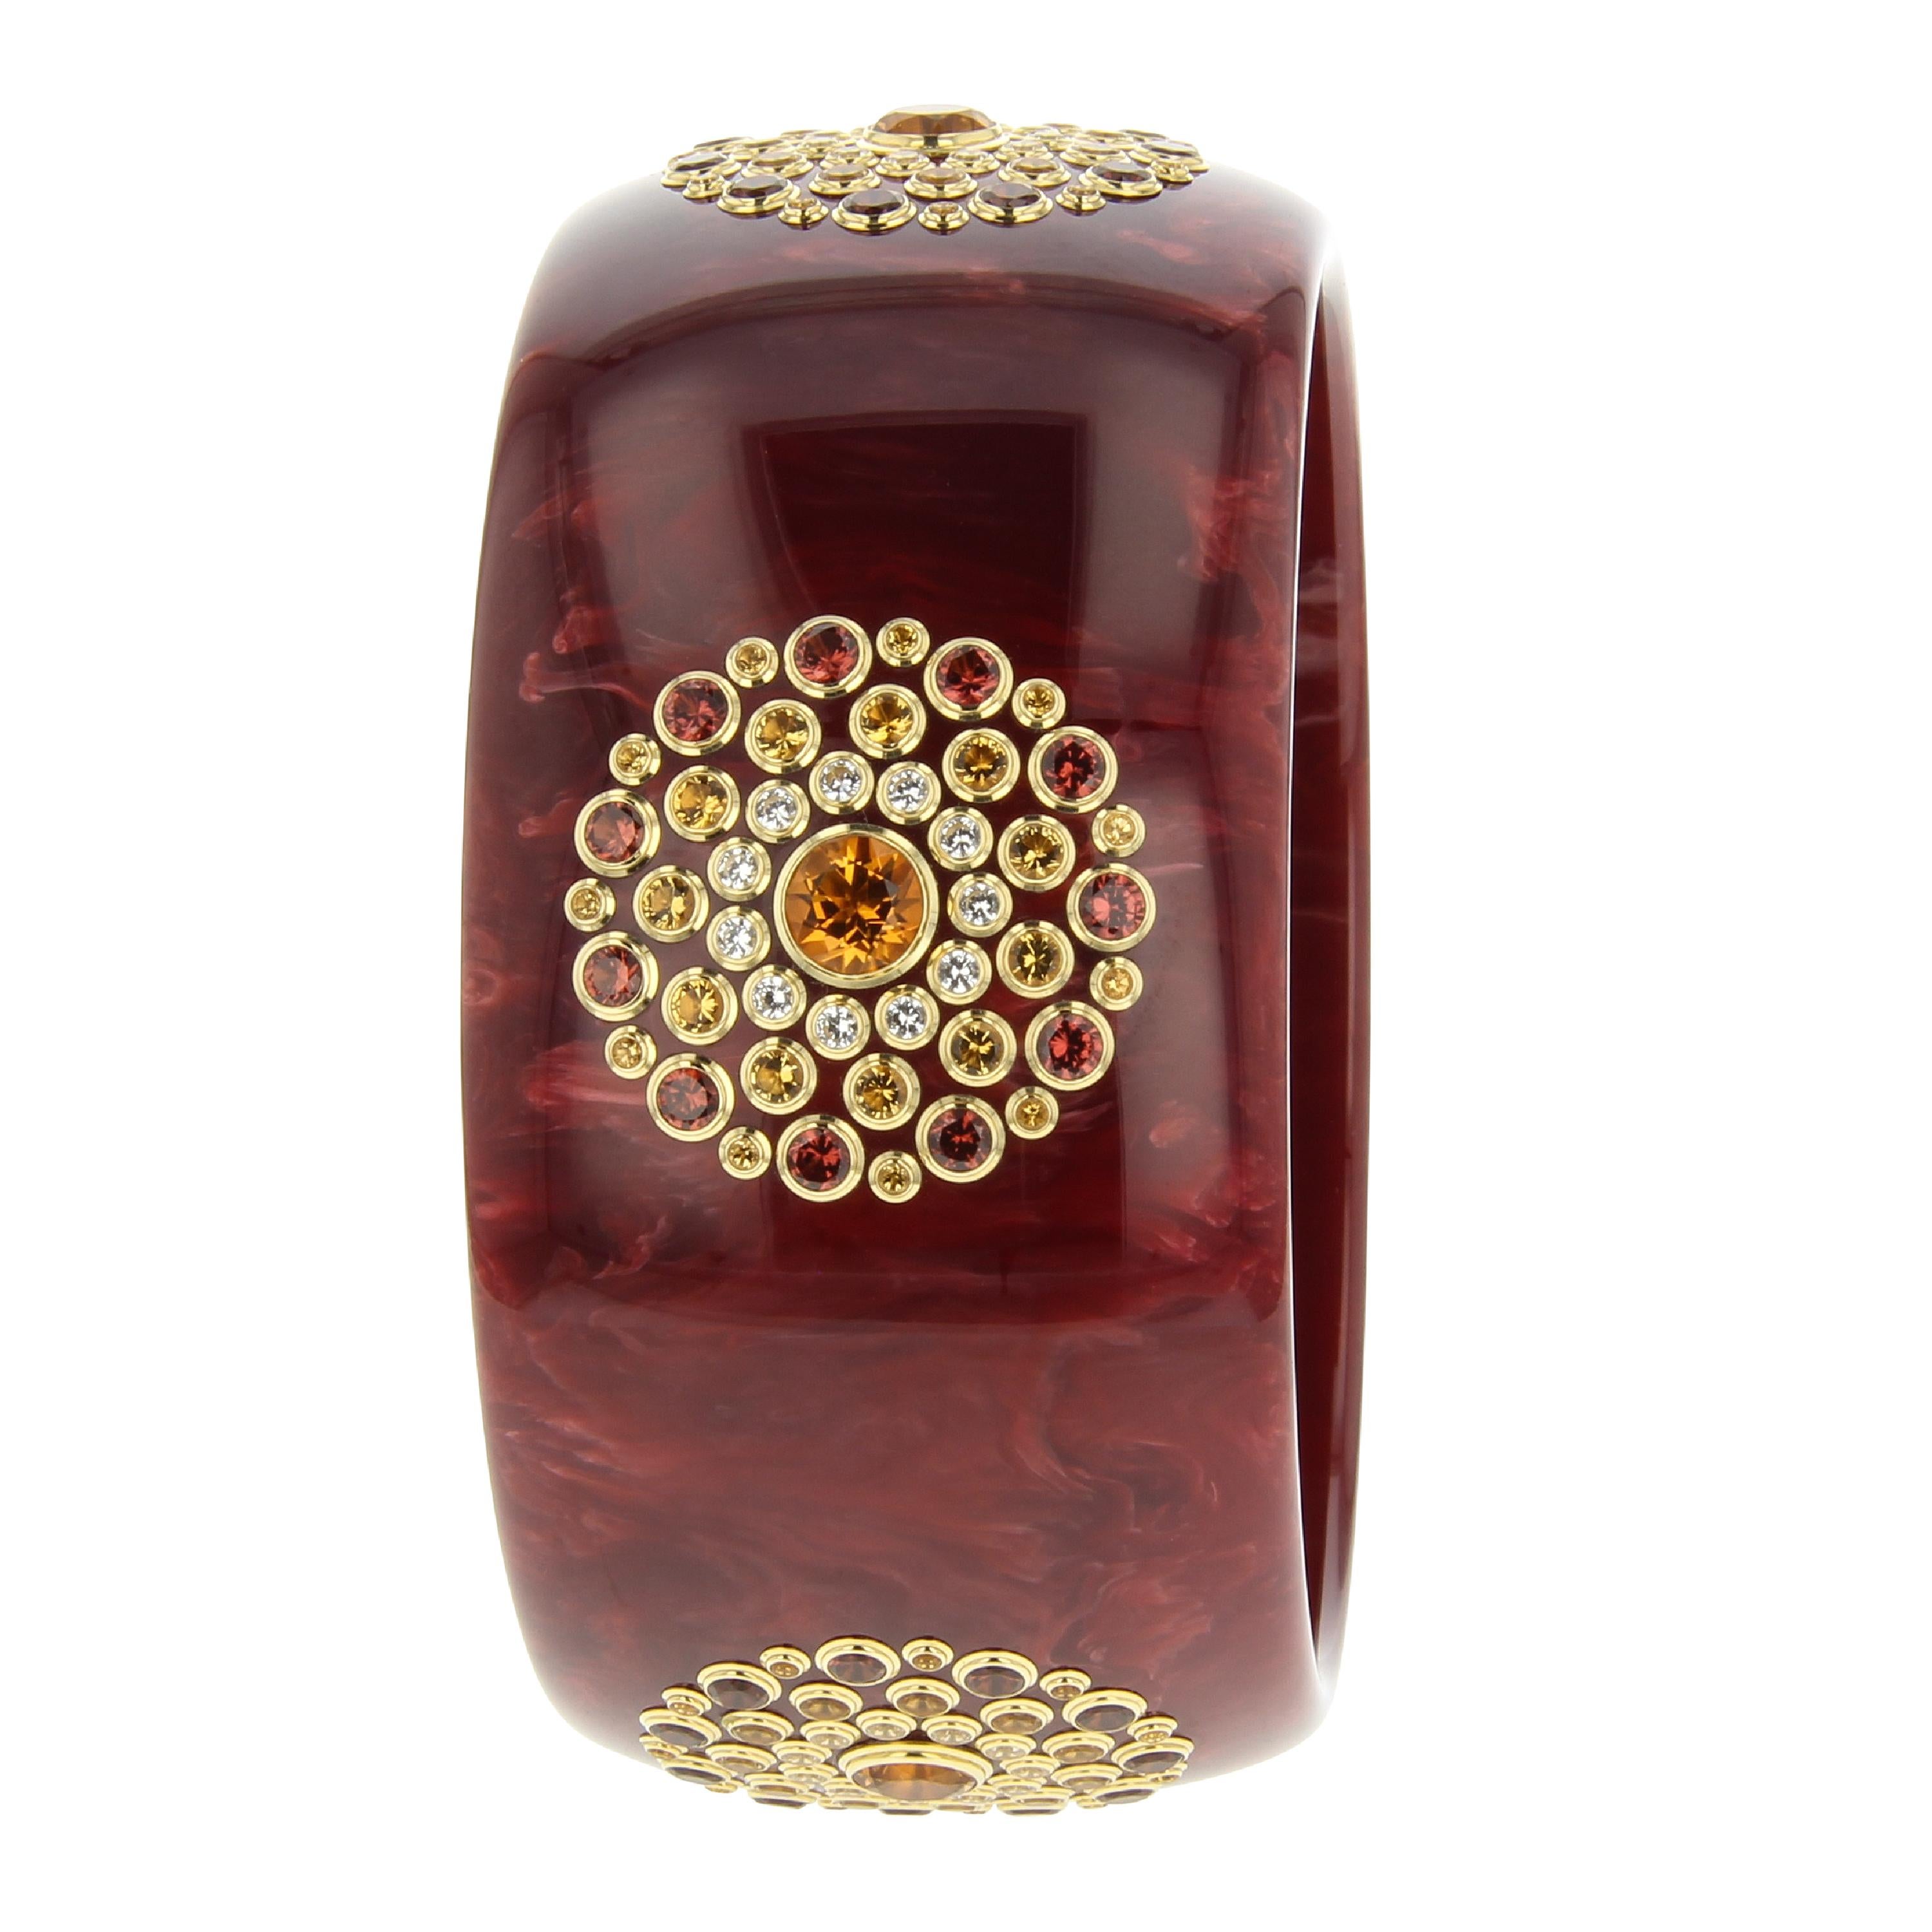 A classic Mark Davis bangle of vintage burgundy bakelite with five stations of perfectly placed fine gemstones set in individual 18k gold bezels. A very rich and elegant bangle that will pair well with browns, pinks, yellows and black.

Full details